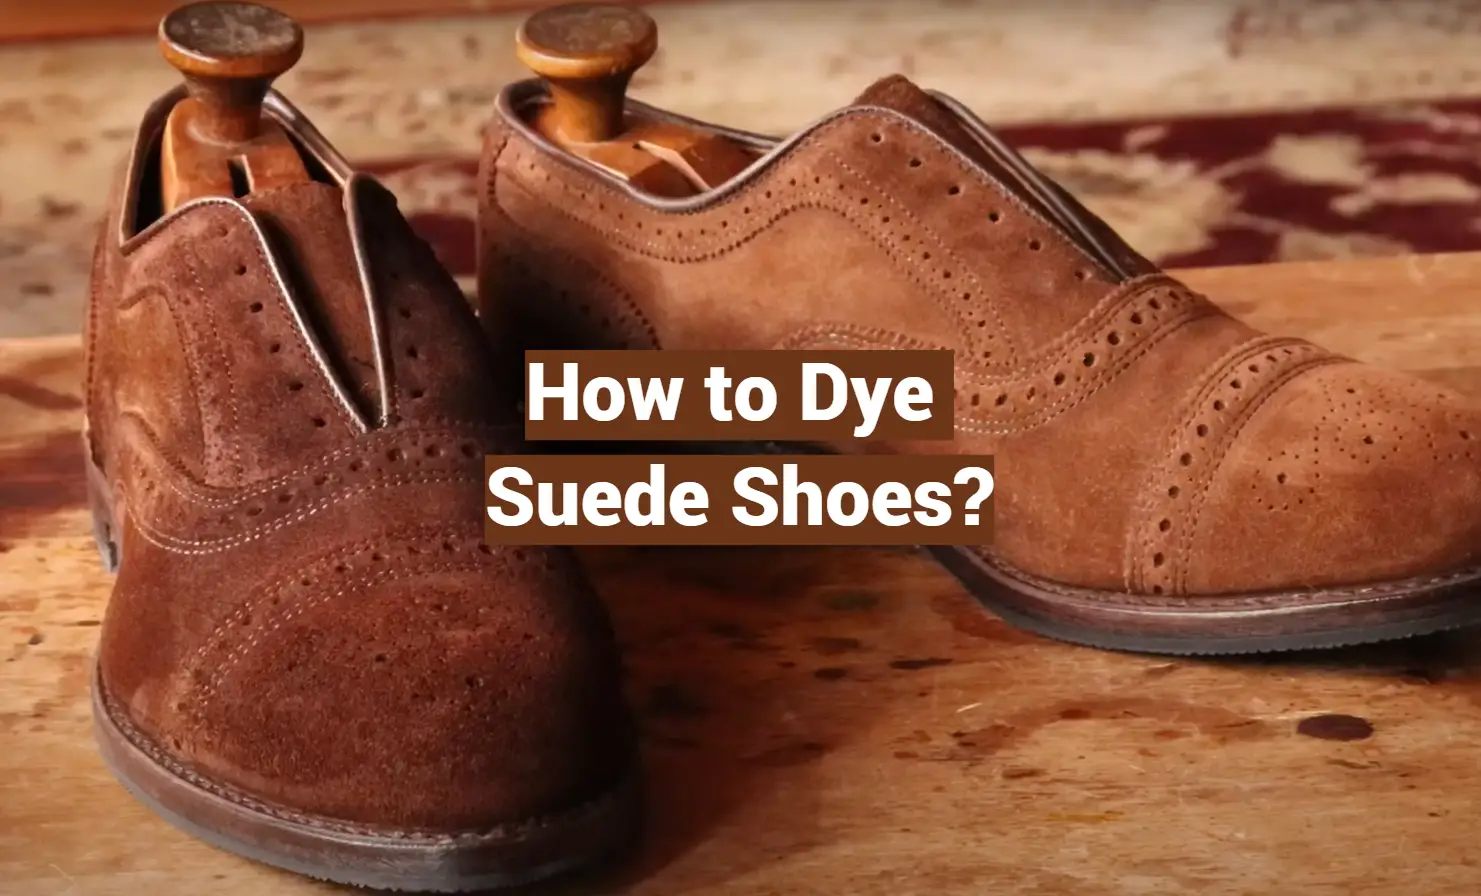 How to Dye Suede Shoes?